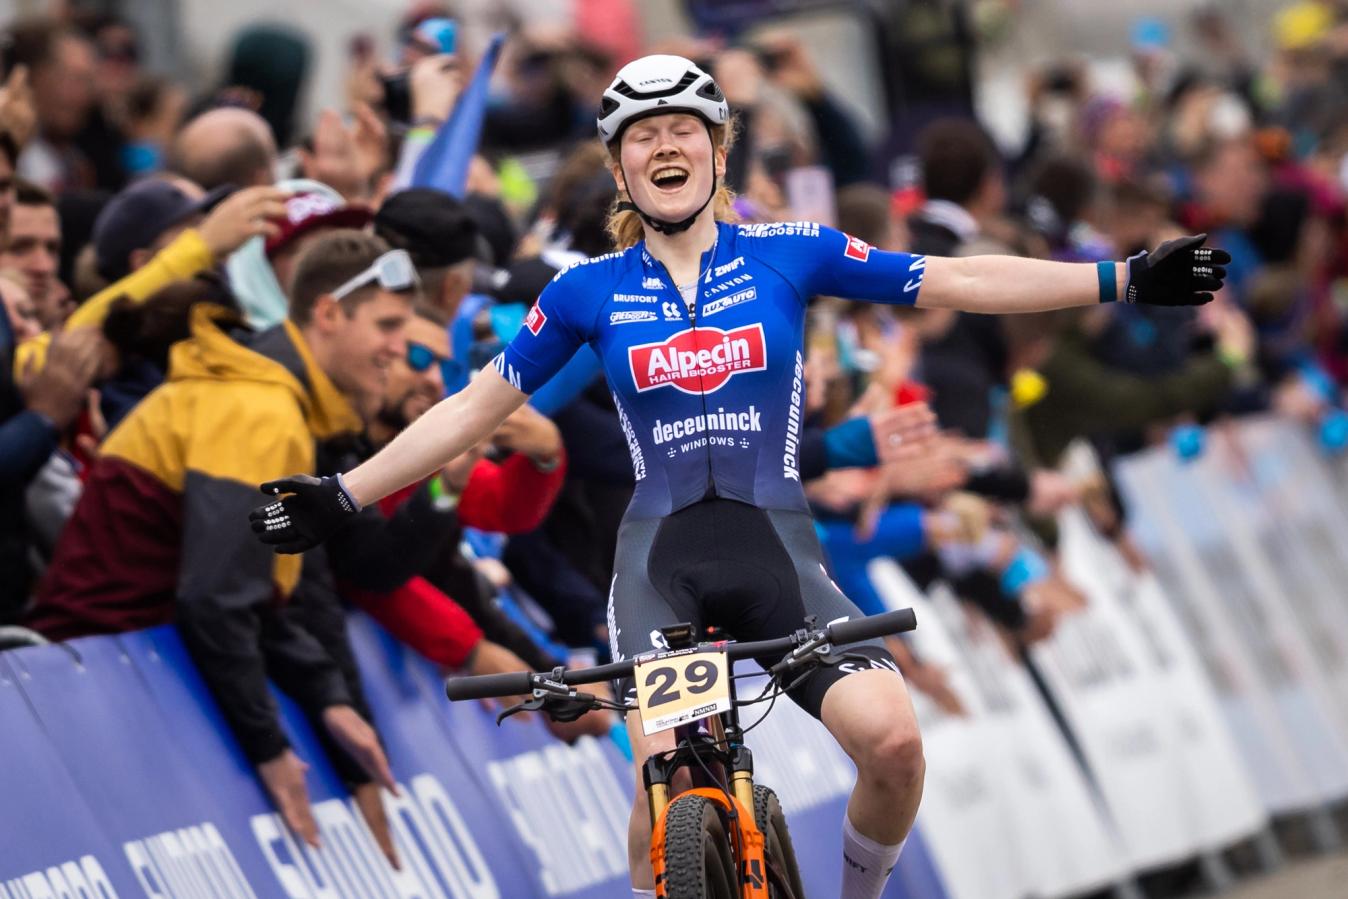 Puck Pieterse crosses the line to take victory in her first-ever elite XCO World Cup race.